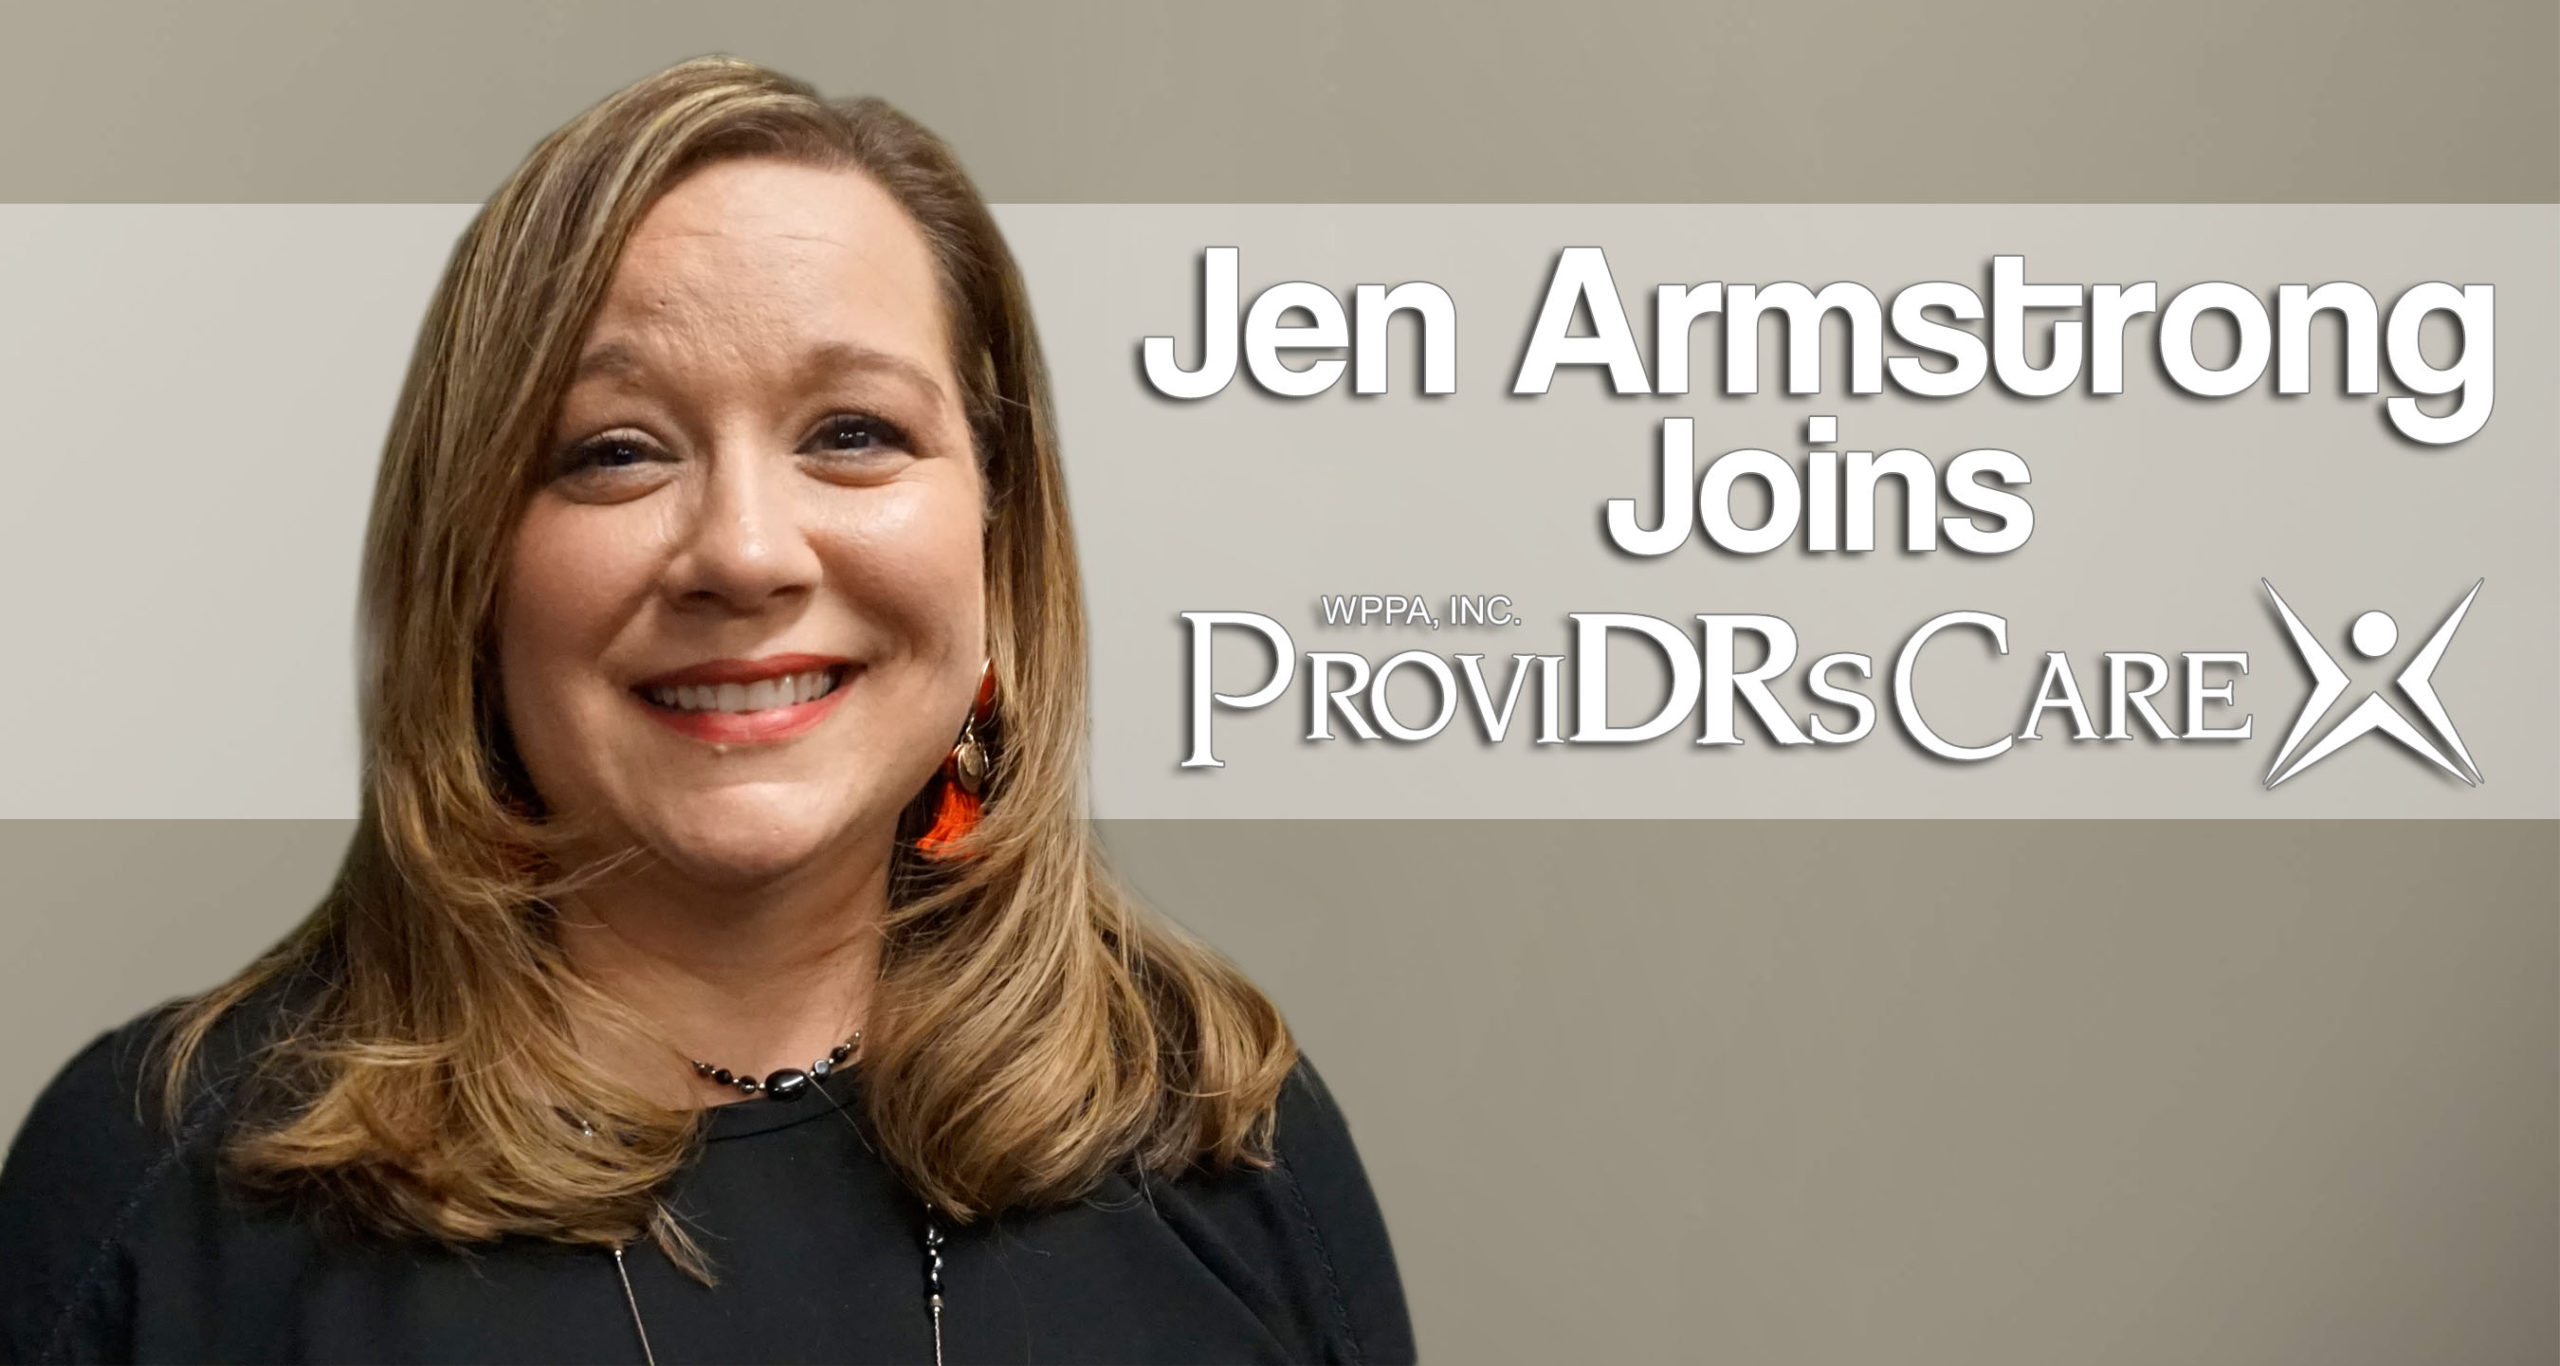 Armstrong Joins ProviDRs Care